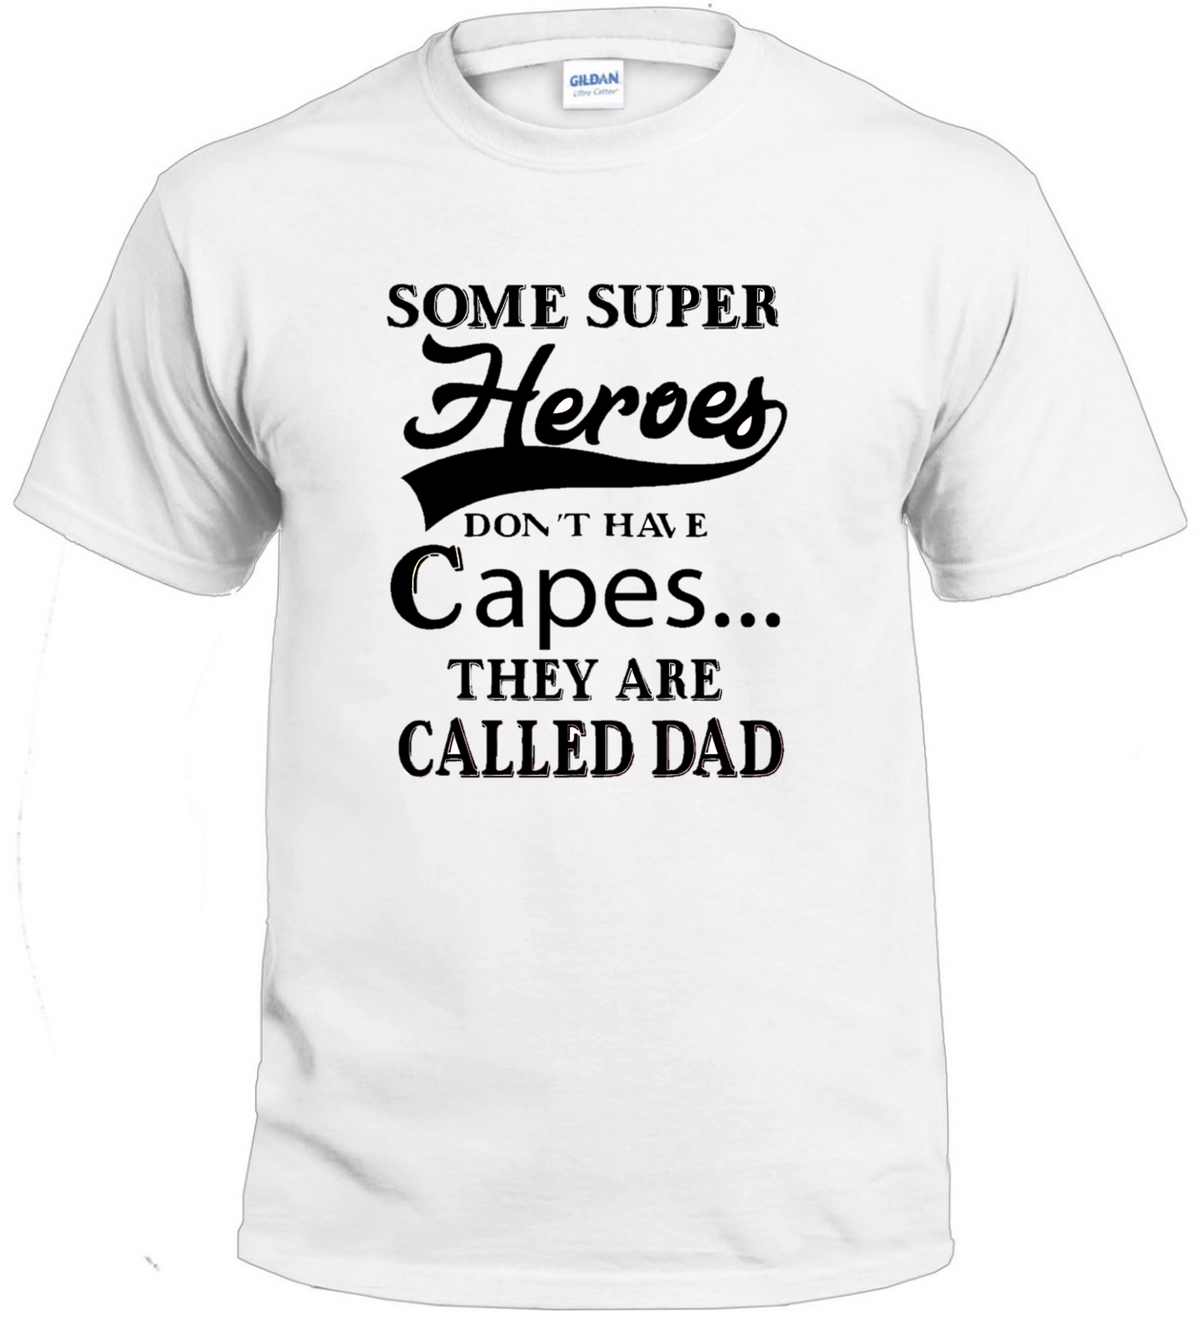 Some Super Heroes Don't Have Capes t-shirt